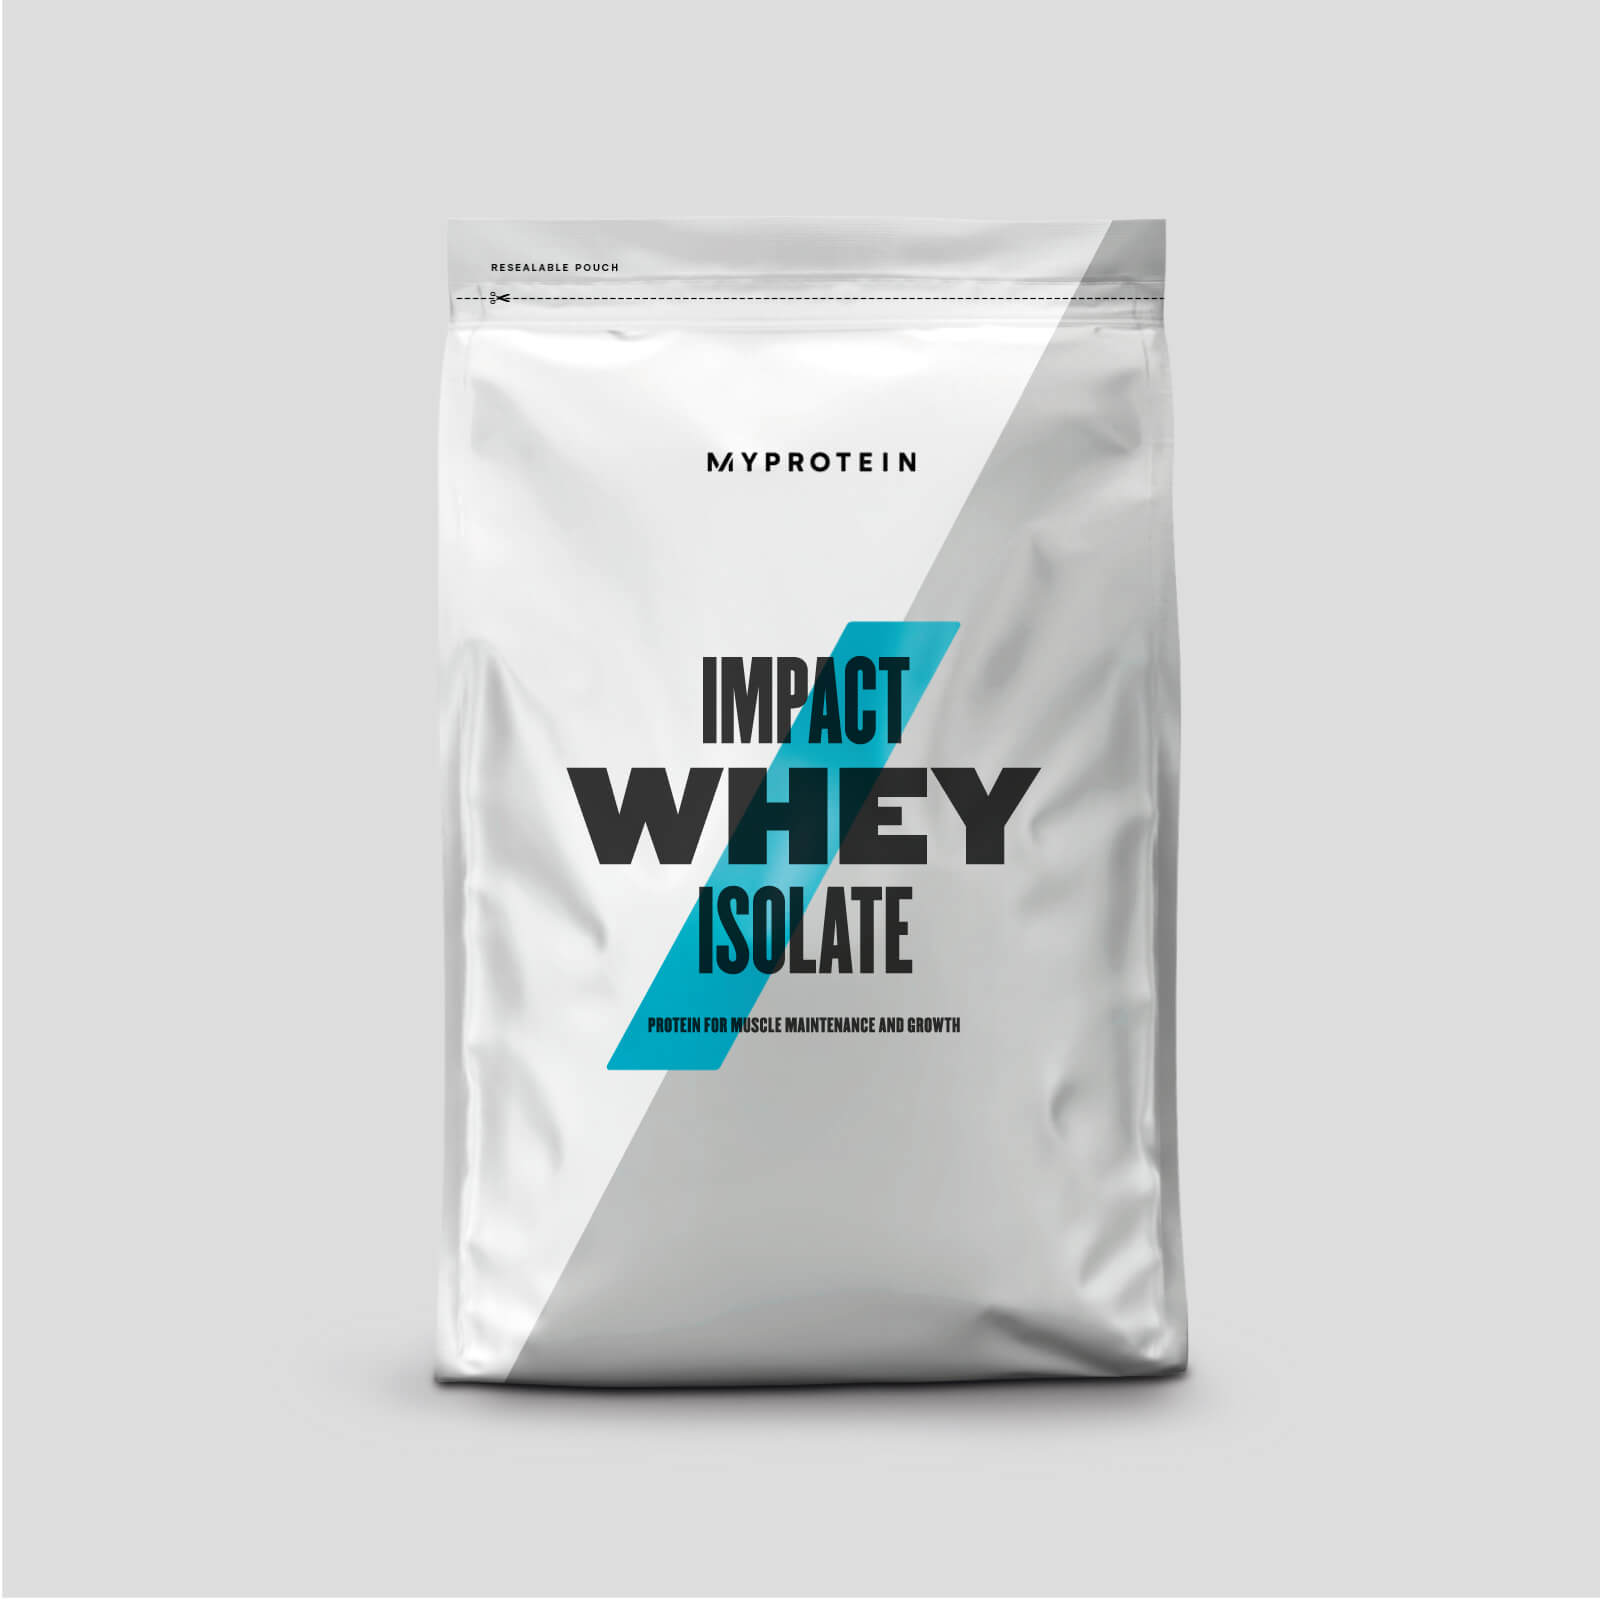 Myprotein Impact Whey Isolate - 1kg - Natural Strawberry